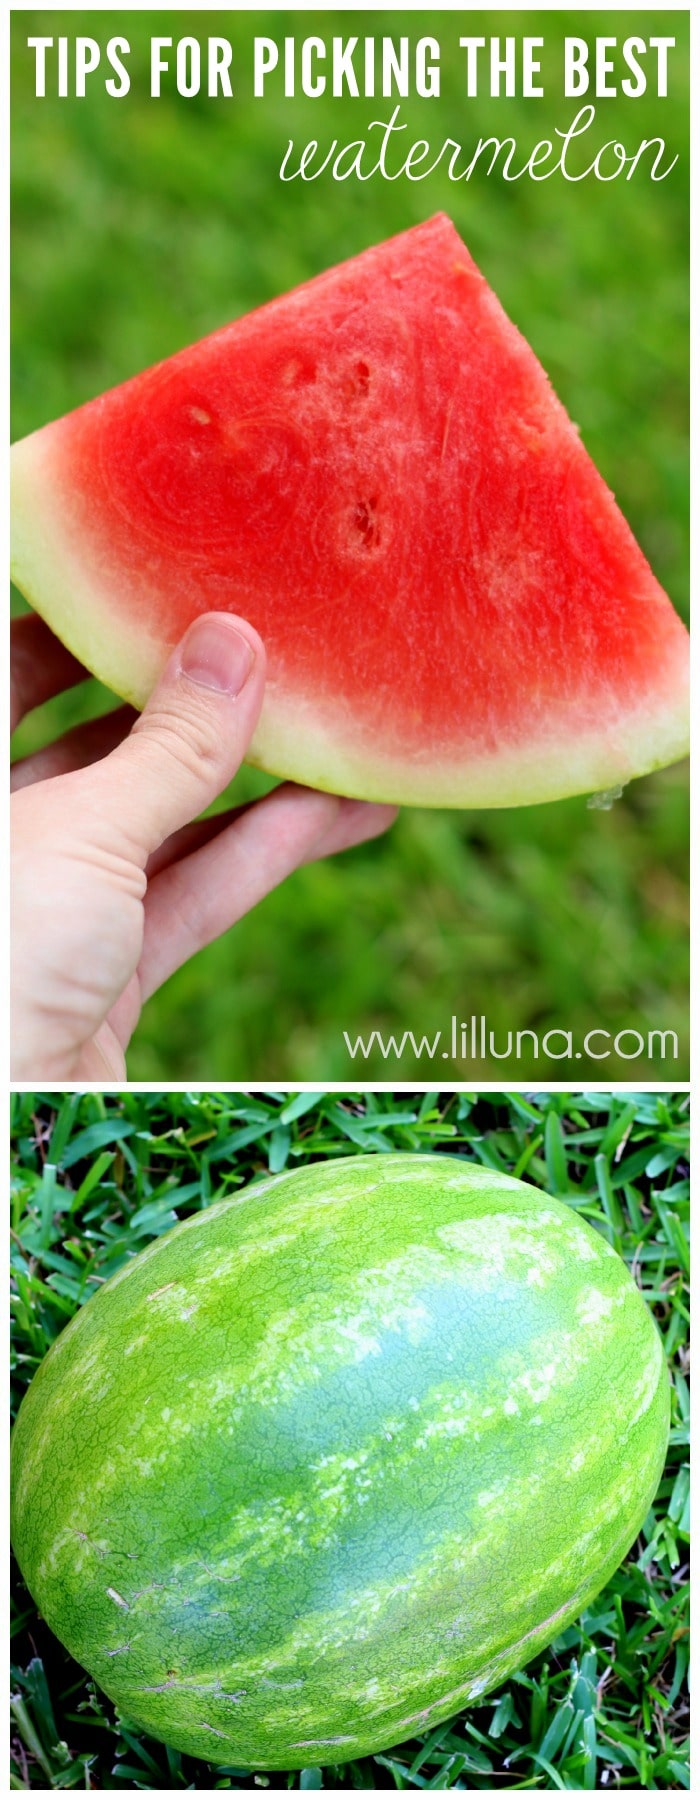 How to Pick Out a Good Watermelon